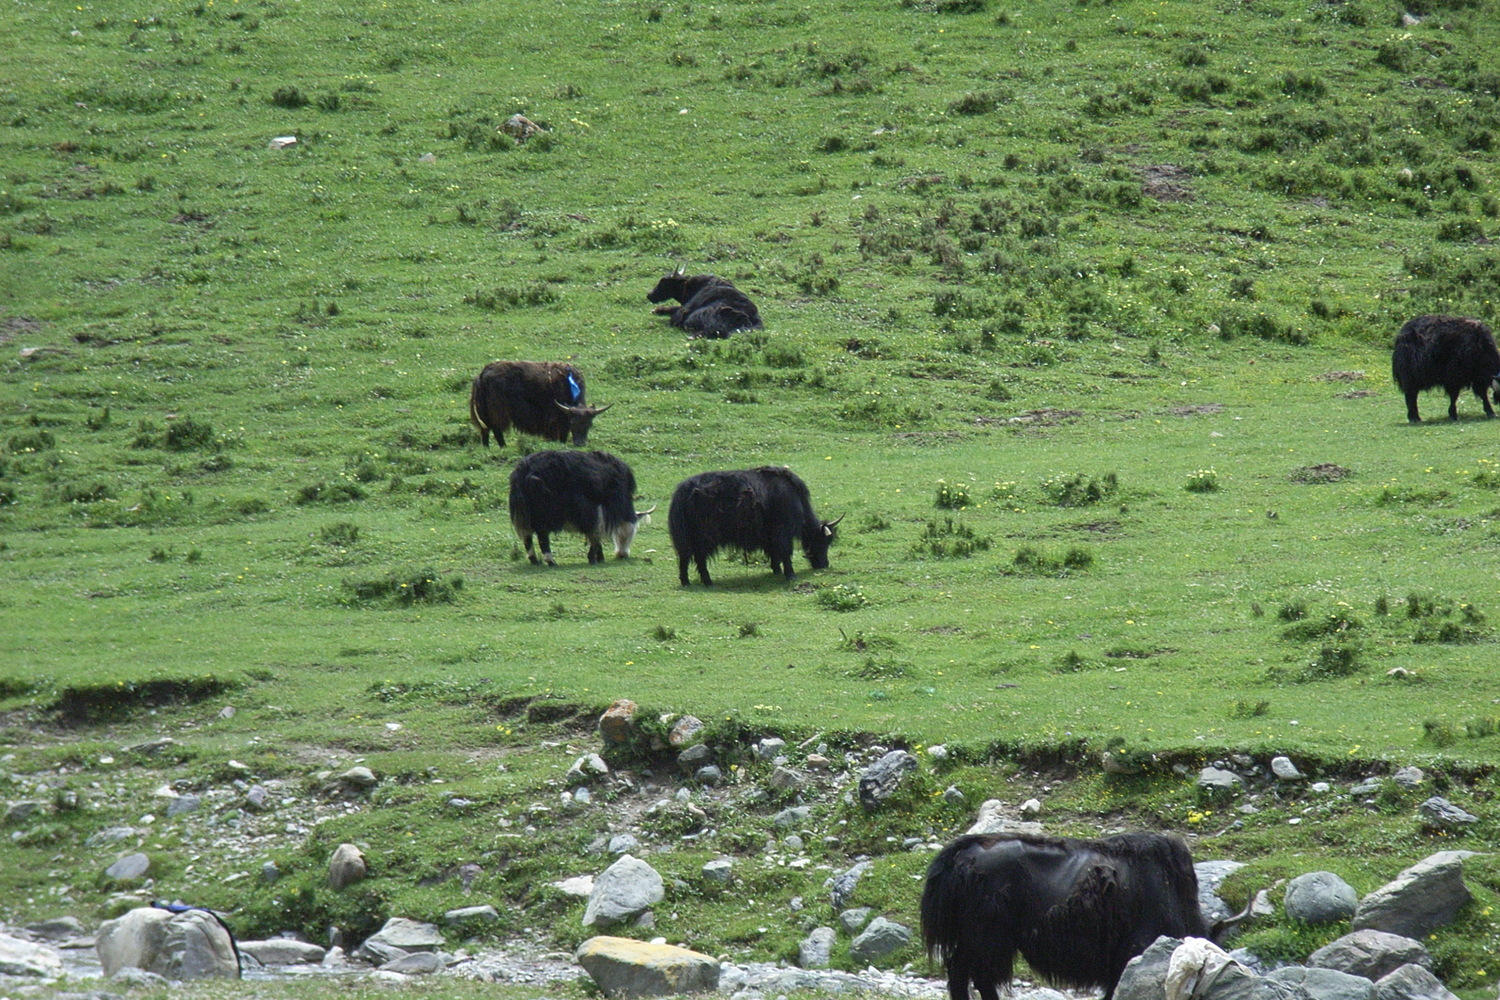 Herds of roaming cattle used these pastures which are not overgrazed.